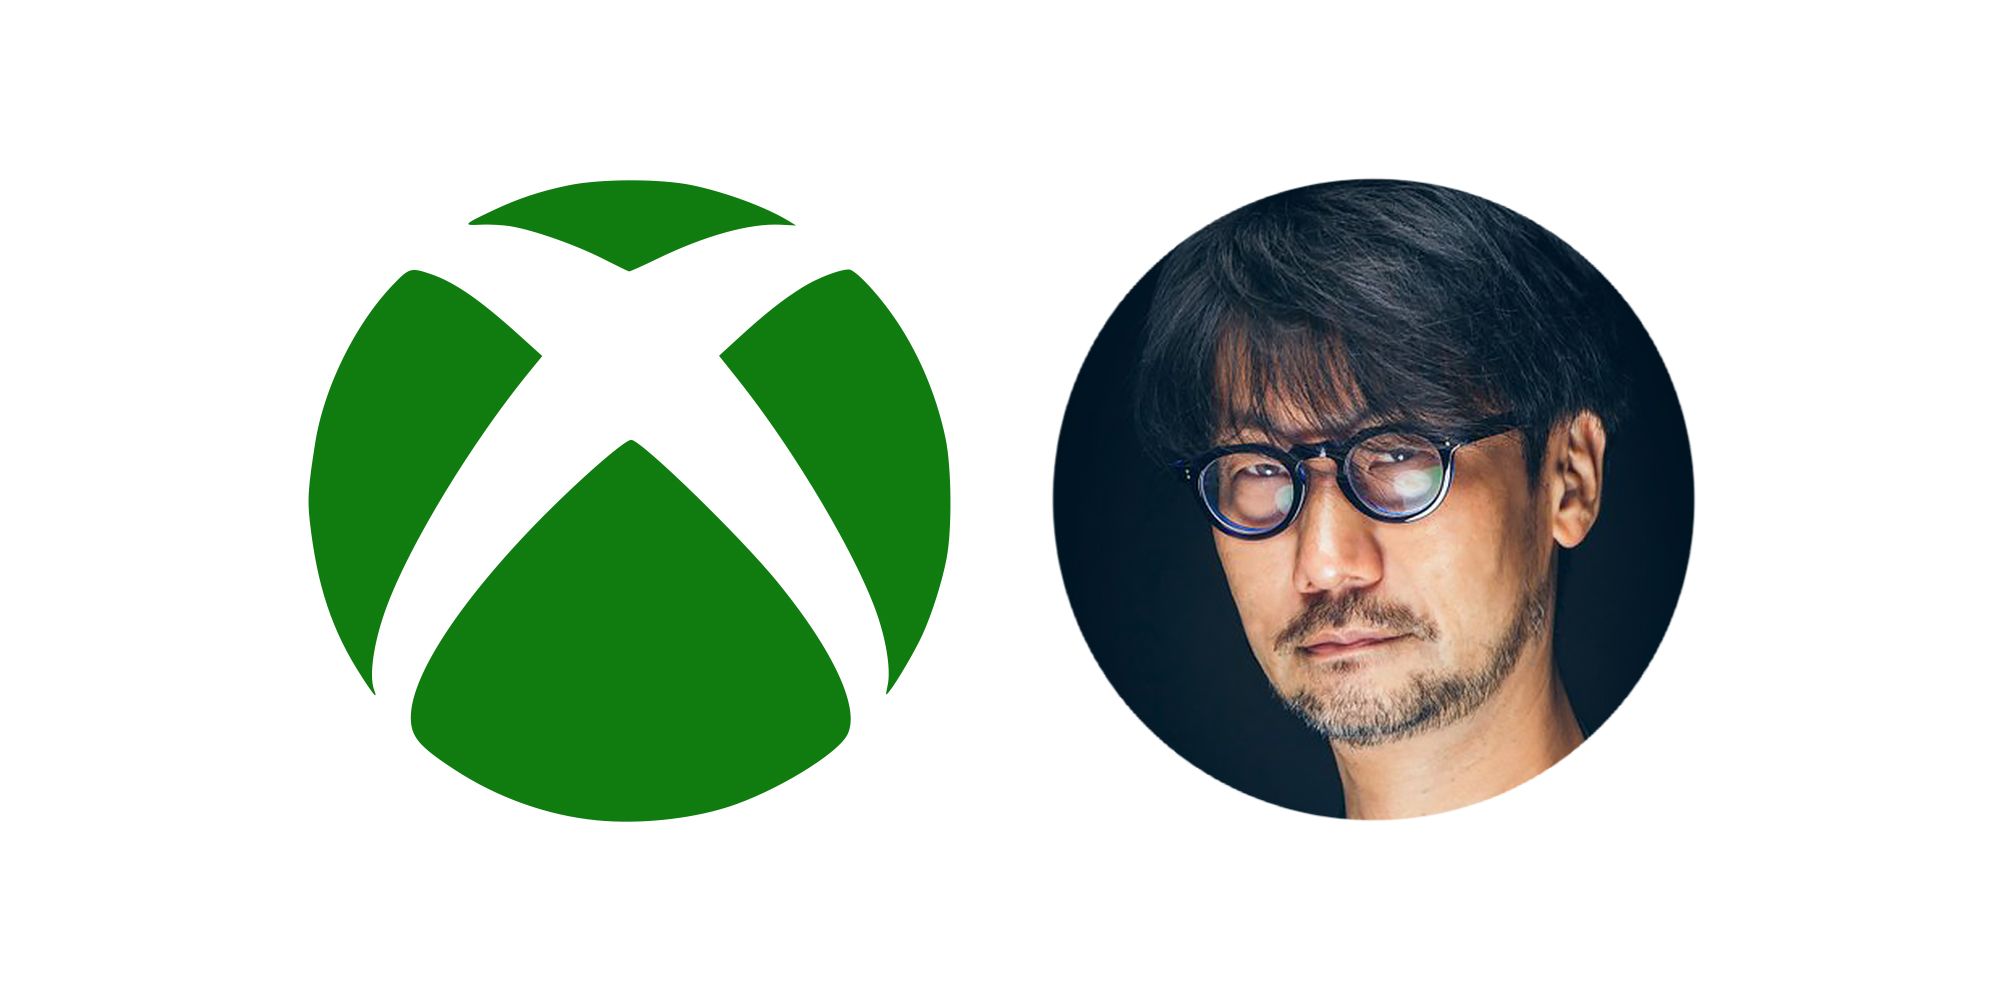 Hideo Kojima is collaborating with Xbox Game Studios for his next game